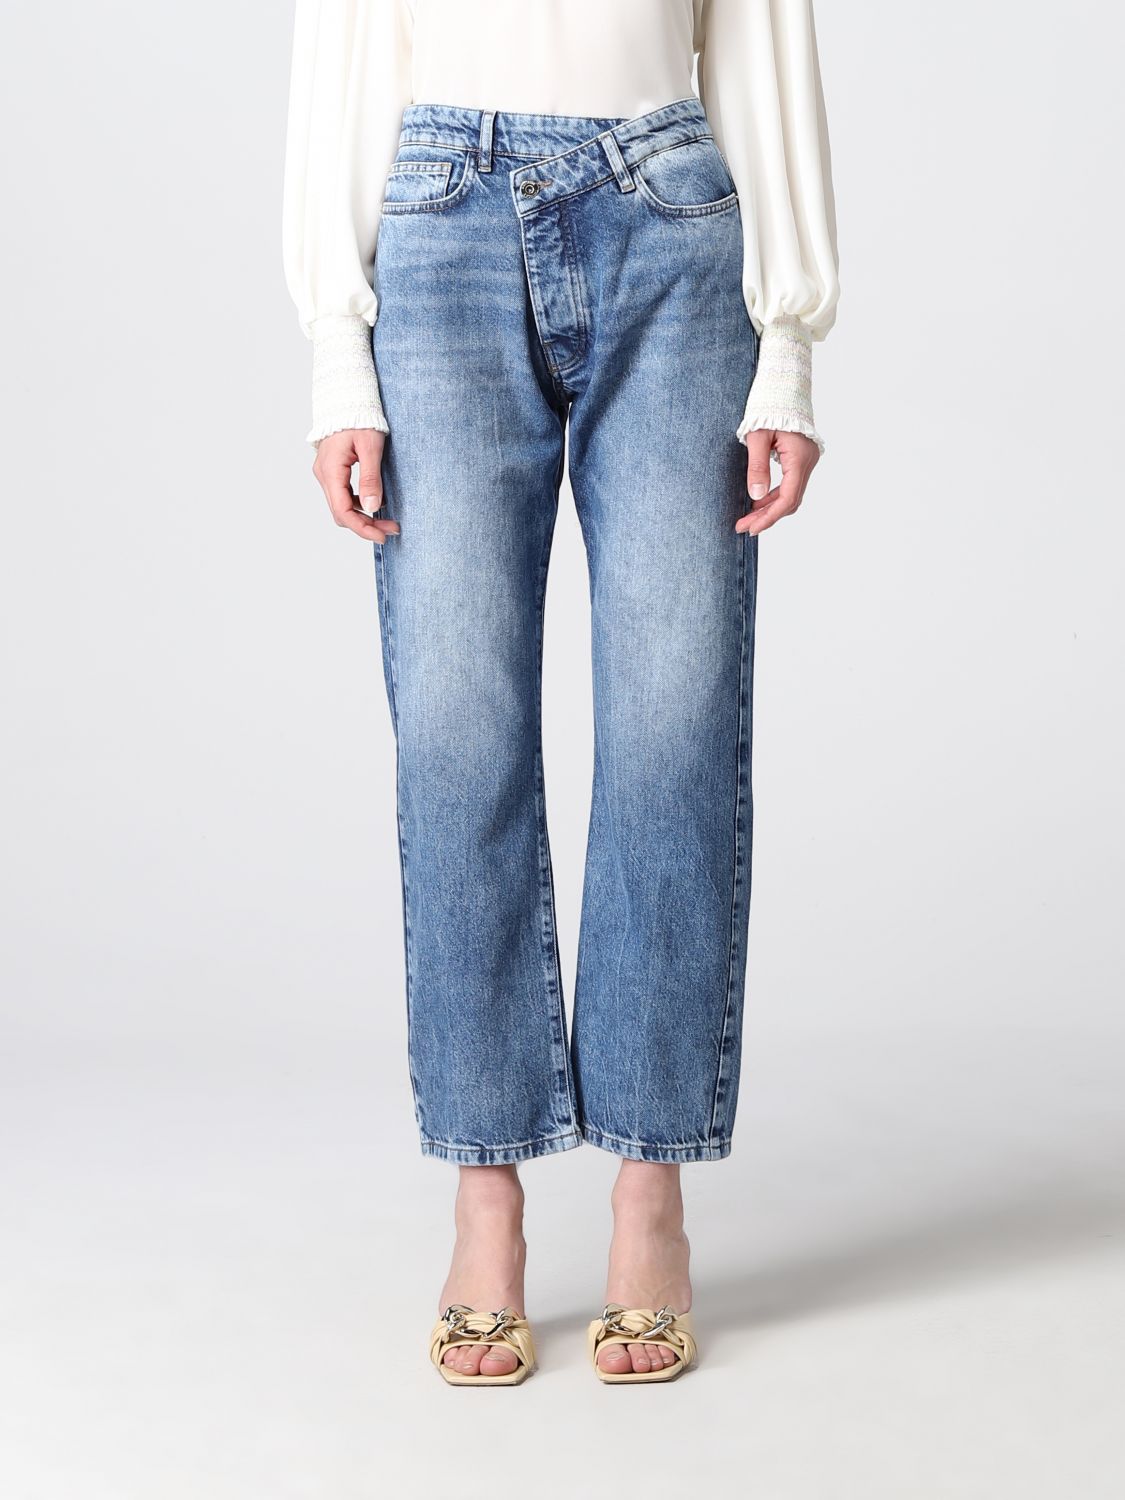 Actitude Twinset Asymmetrical Twinset-actitude 5-pocket Jeans In Denim ...